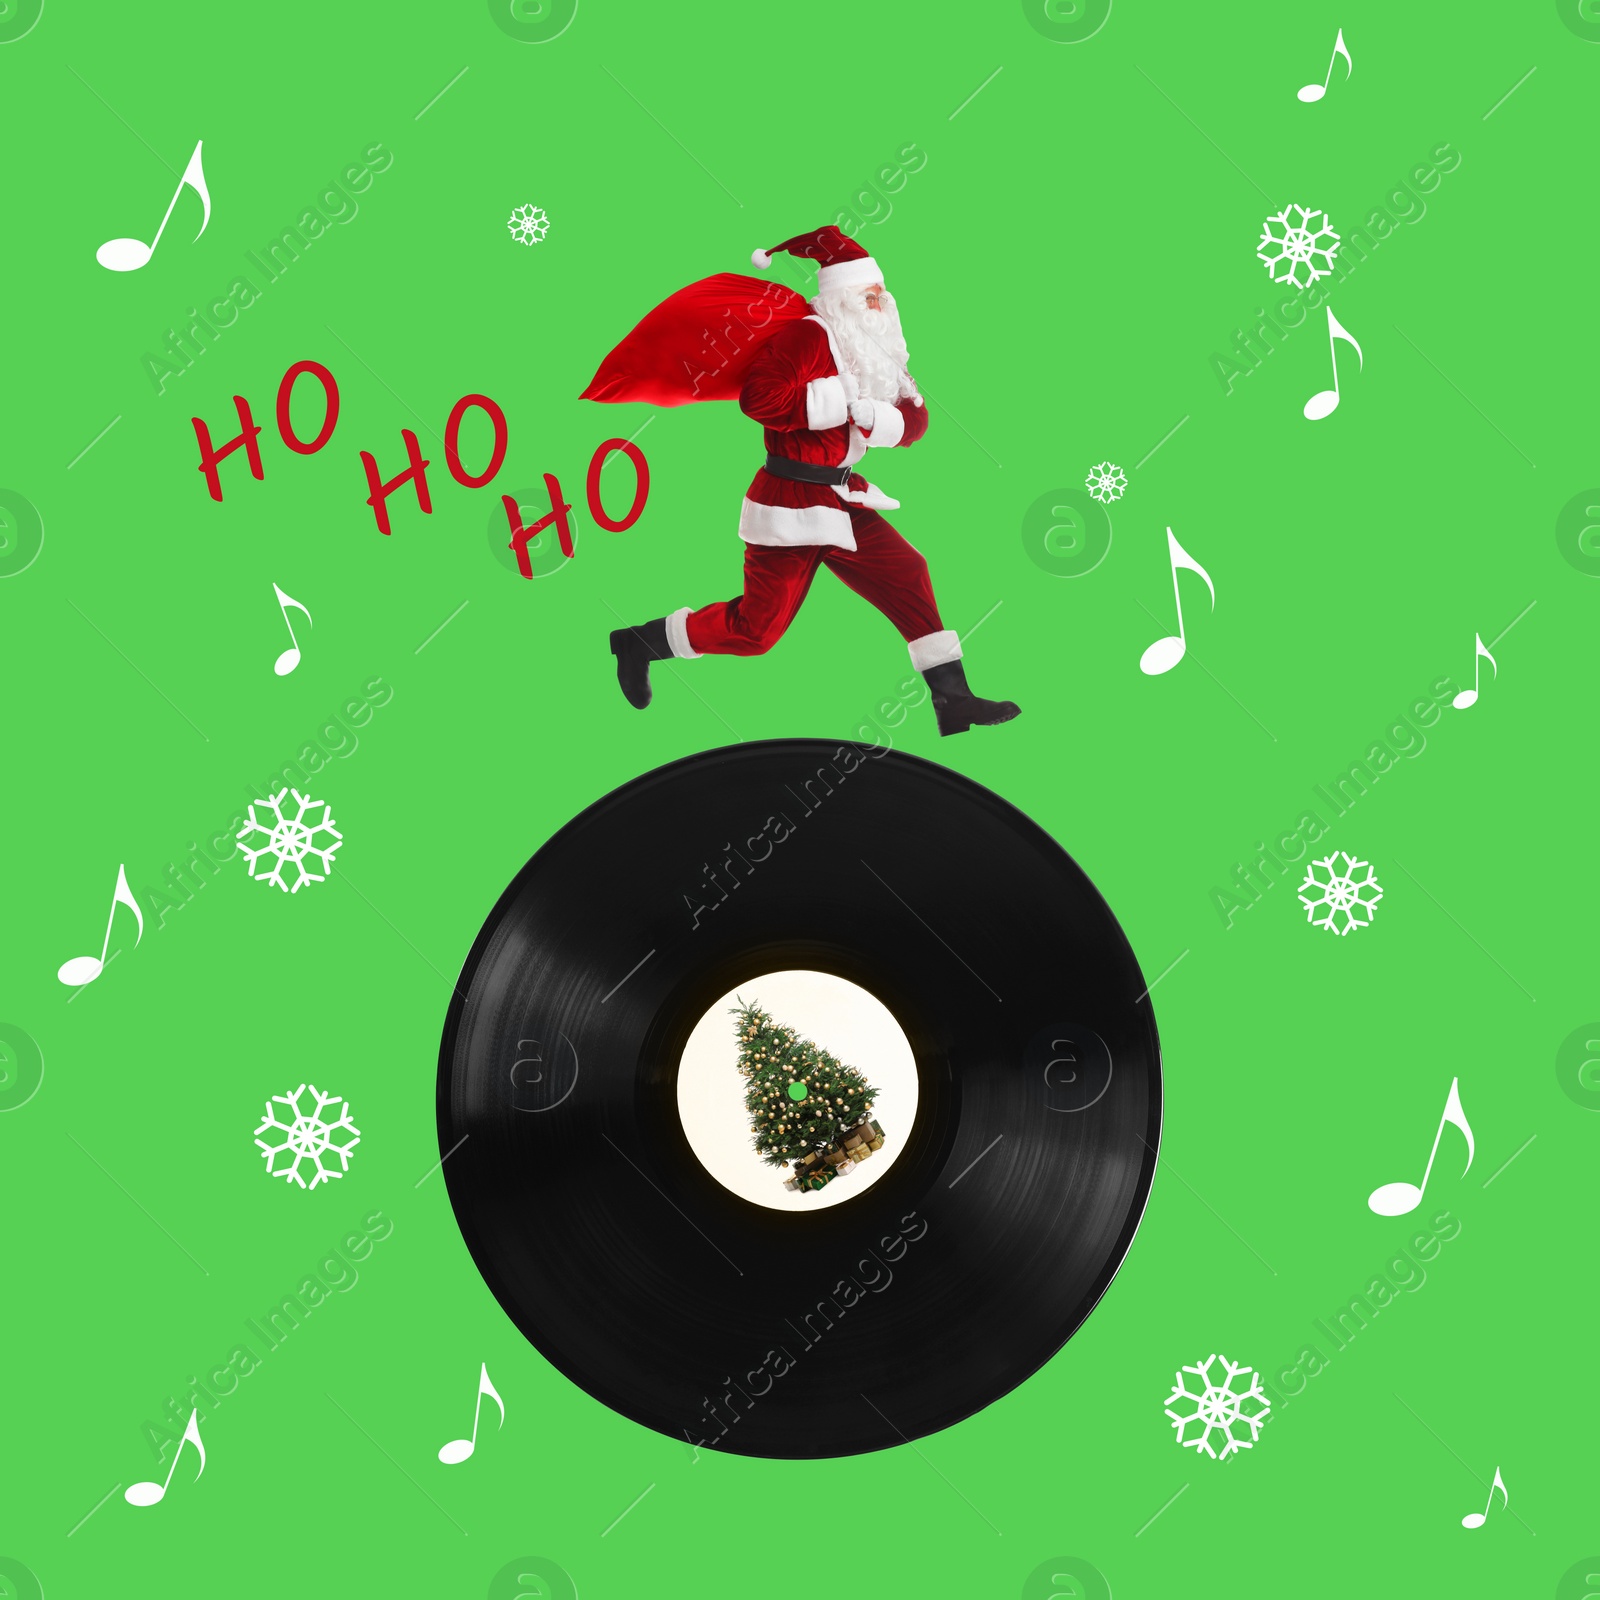 Image of Winter holidays bright artwork. Creative collage with Santa Claus running on vinyl record against light green background